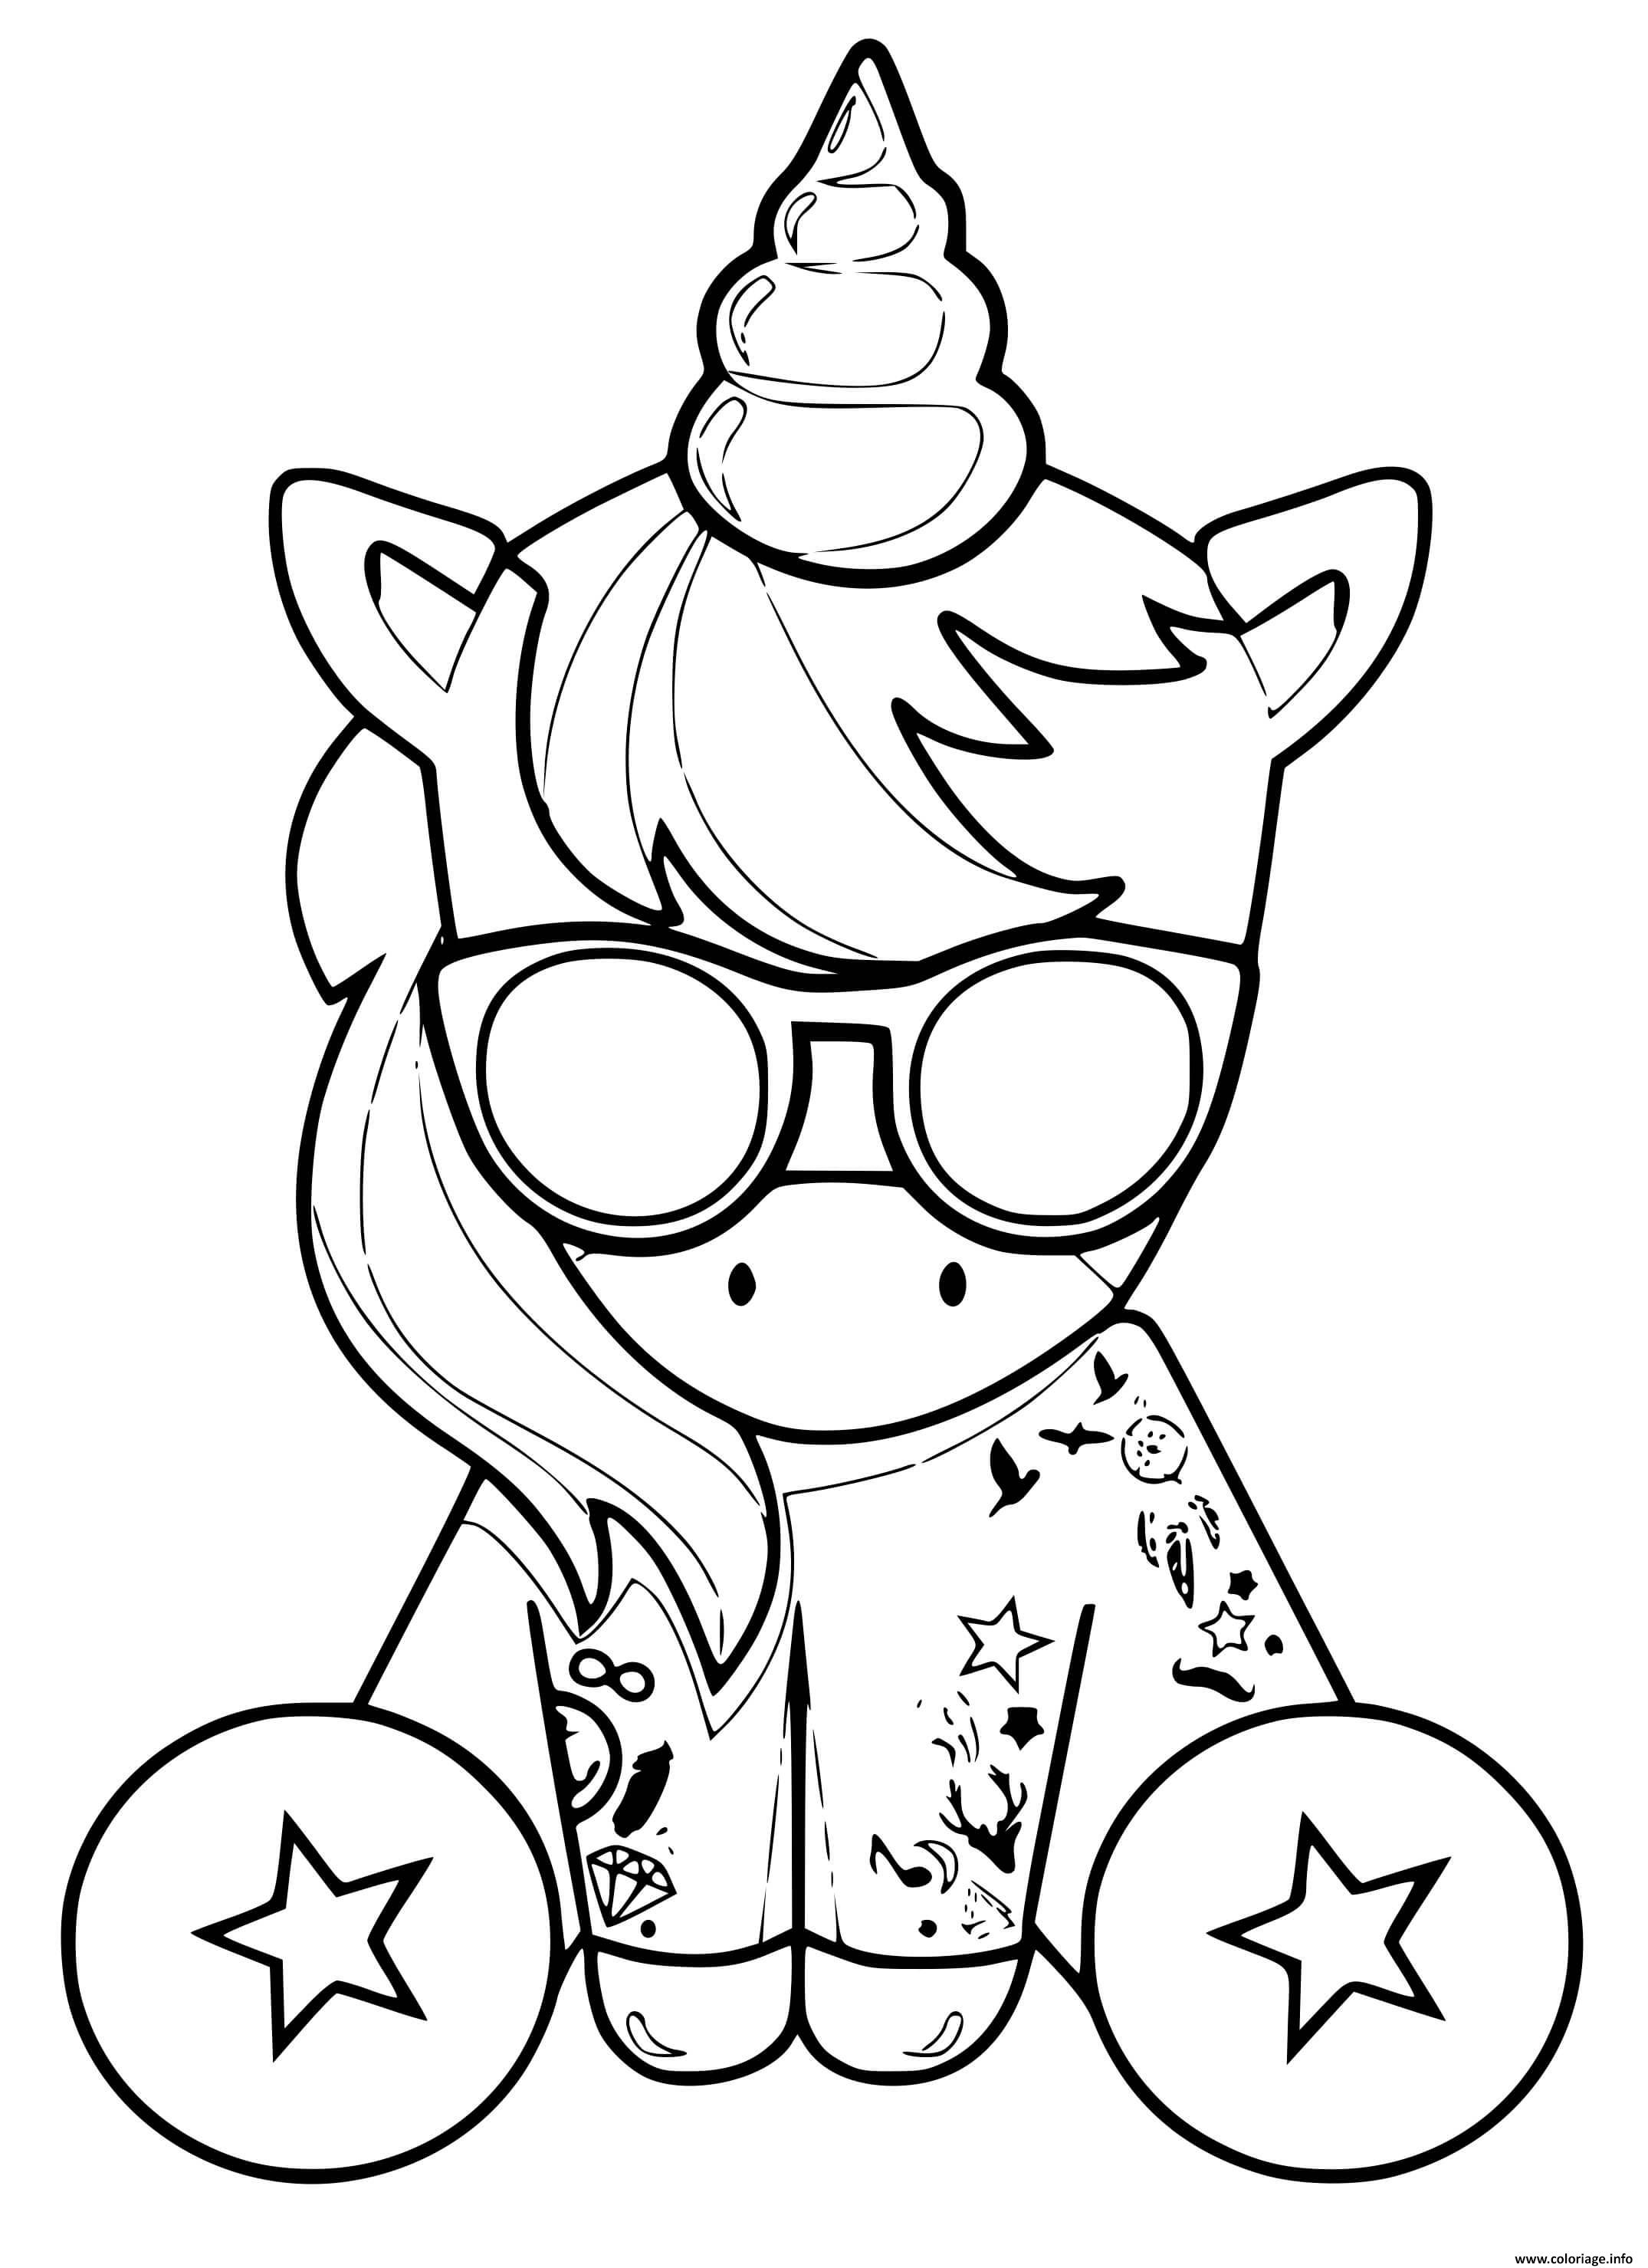 Image of a cool and trendy unicorn with sunglasses and tattoos